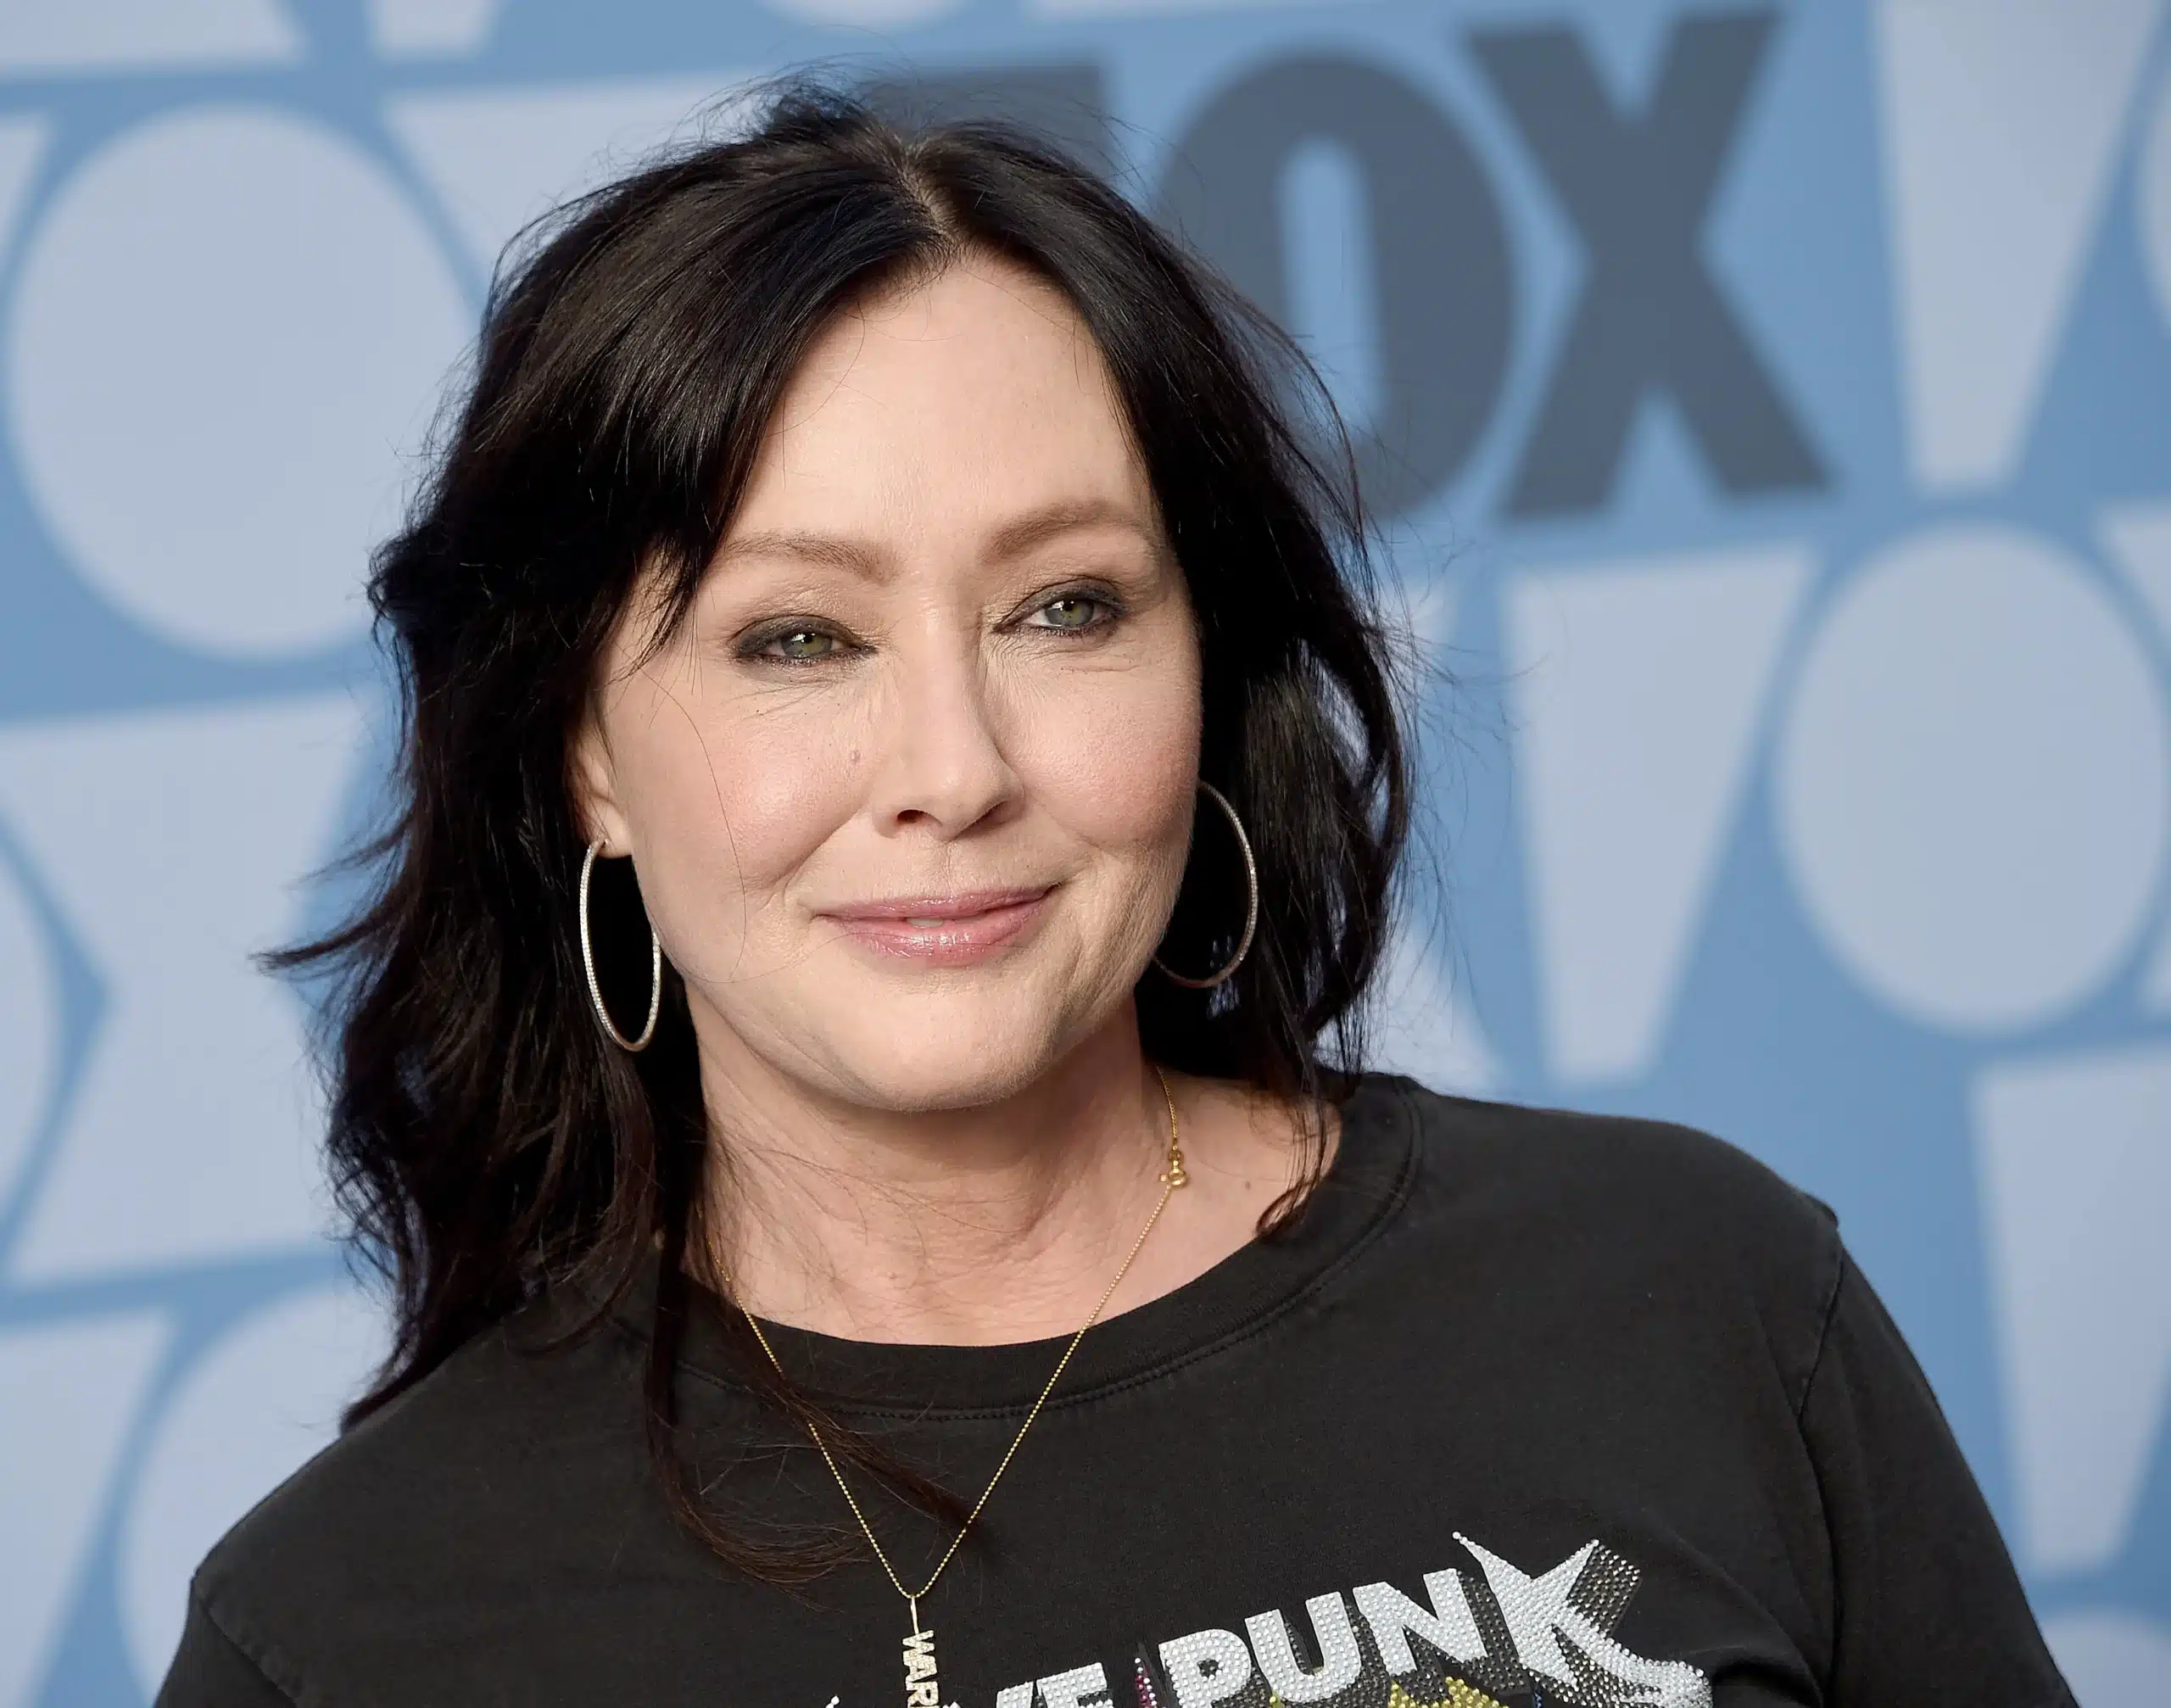 Shannen Doherty's Gray Divorce: "No Other Option"